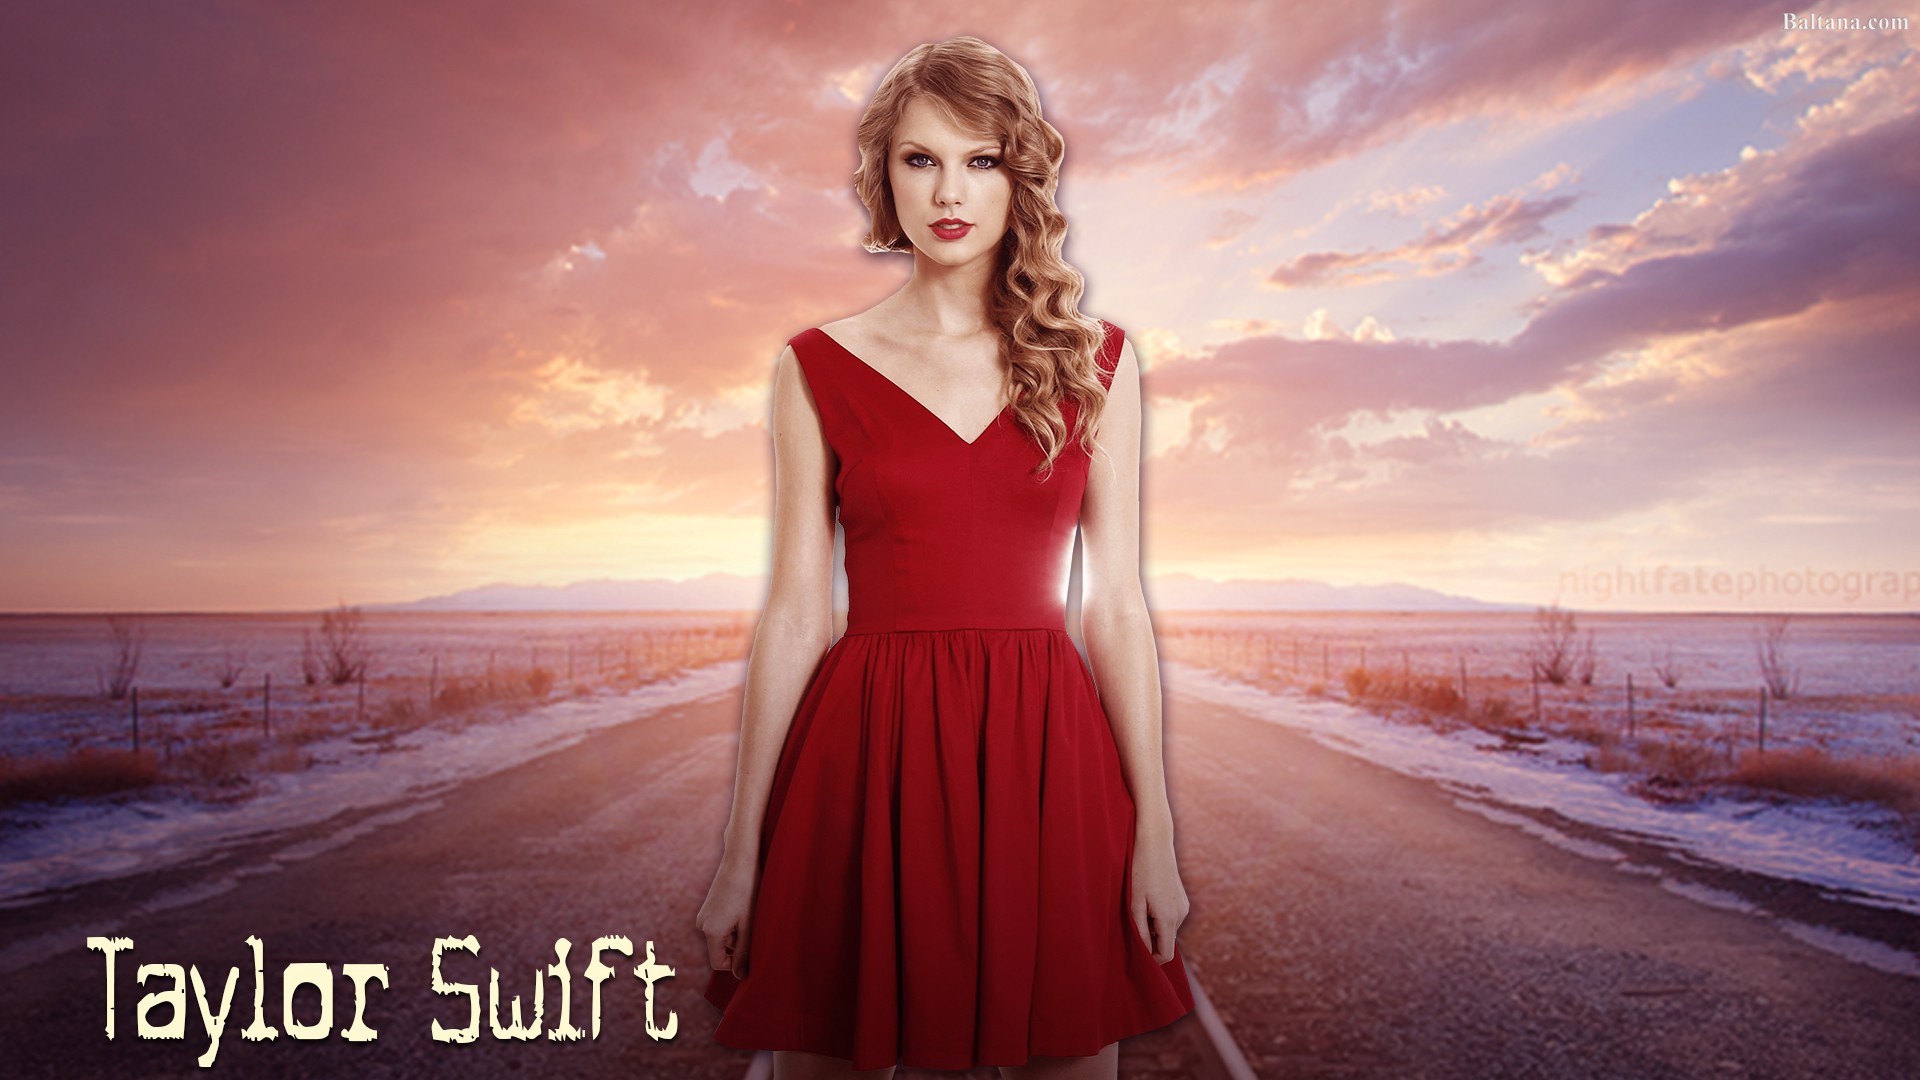 Taylor Swift Wallpaper HD Background Image Pics Photos